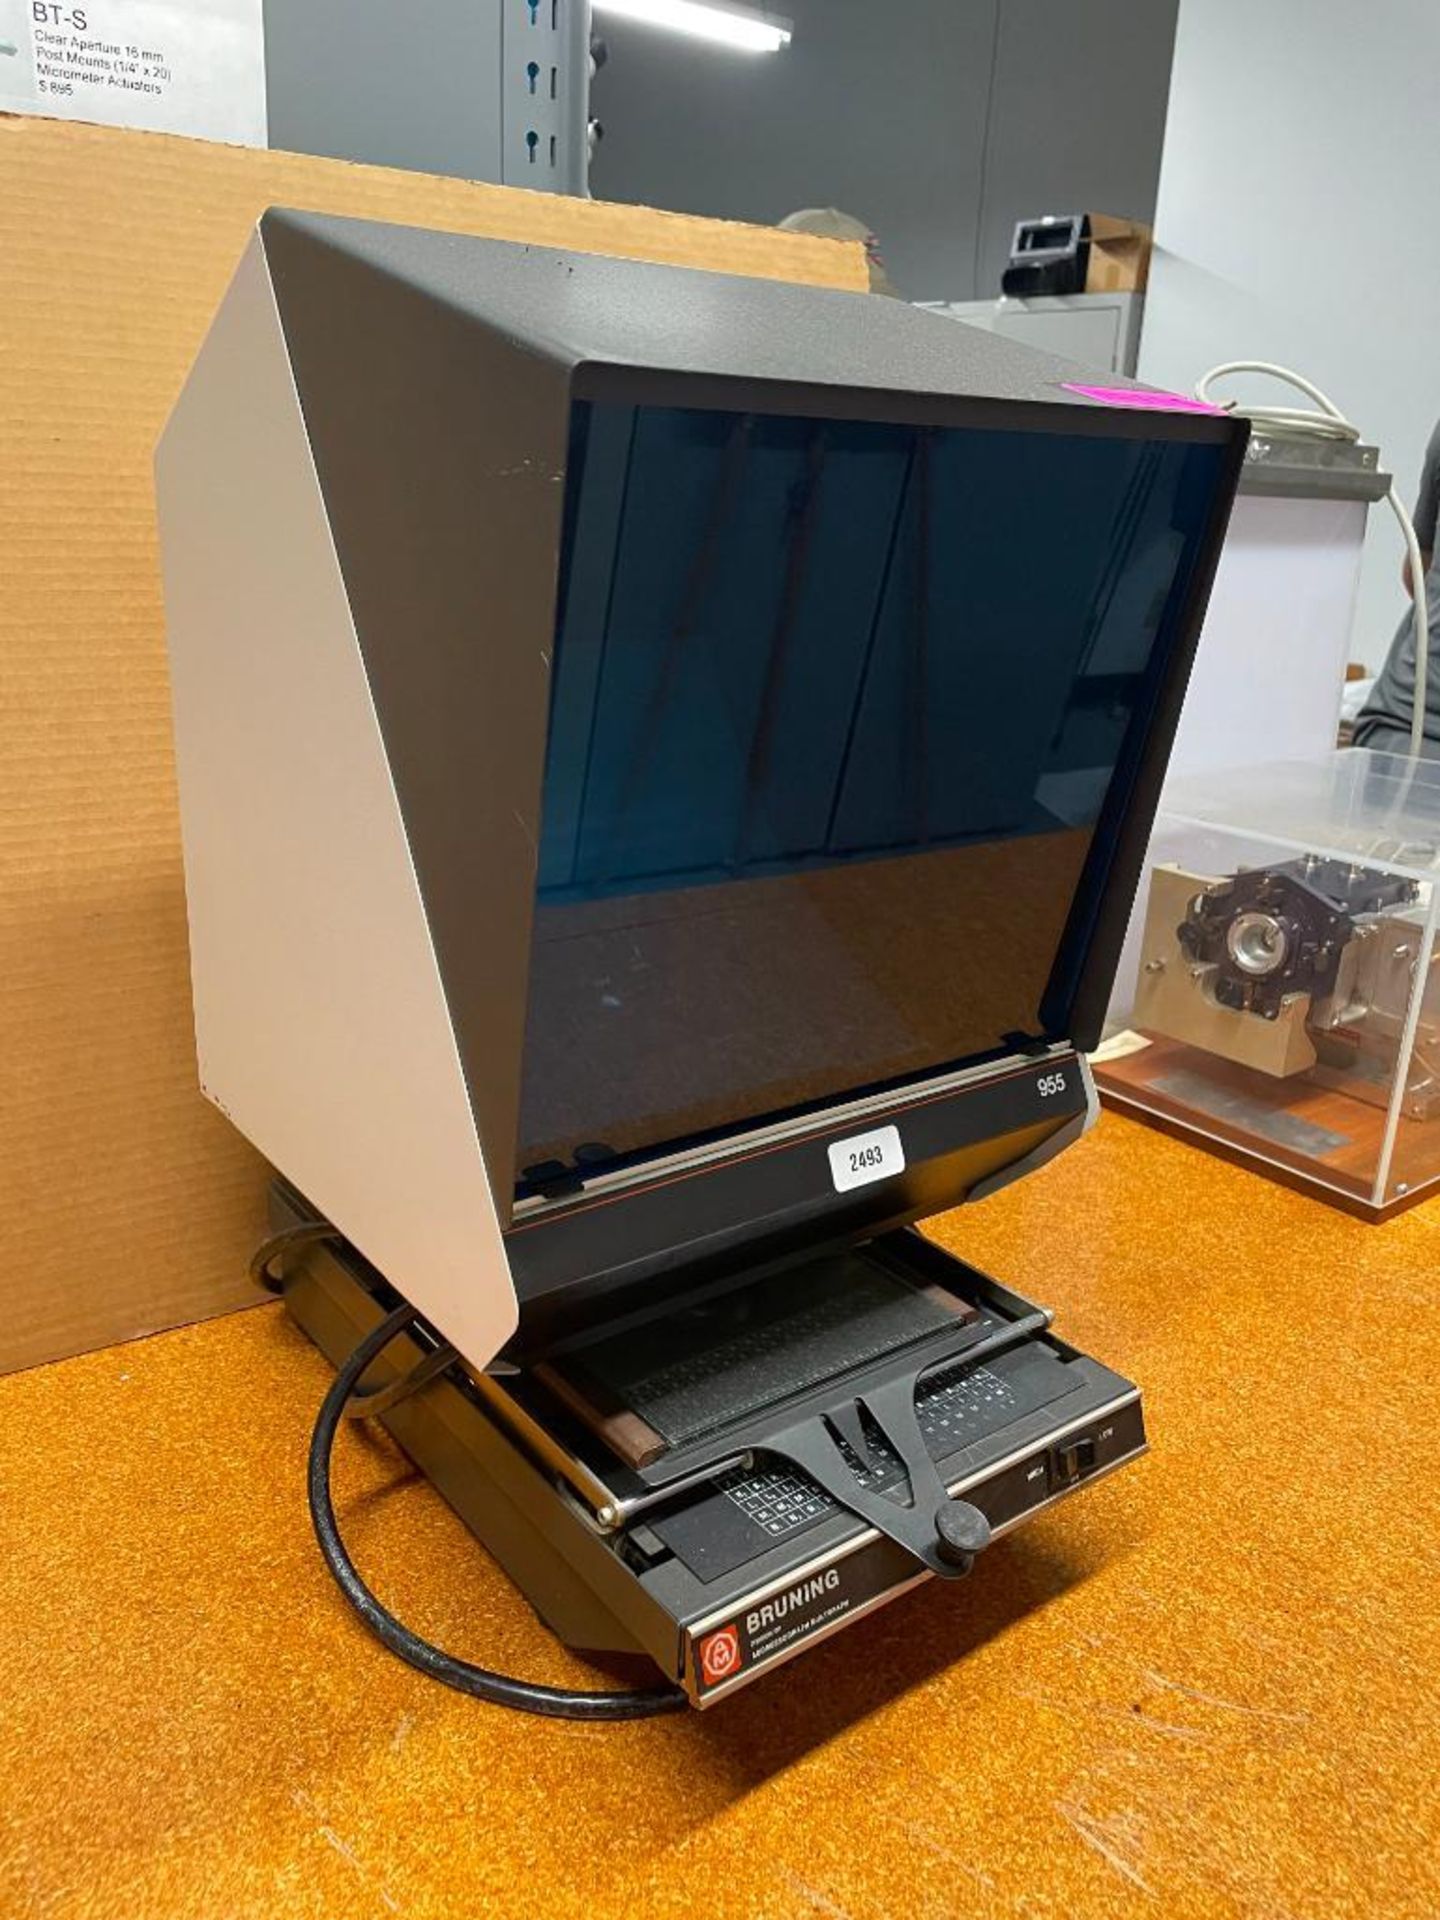 AM BRUNING 955 MICROFICHE PROJECTOR MICROFILM READER BRAND/MODEL: BRUNING 955 INFORMATION: 120 VOLTS - Image 5 of 10